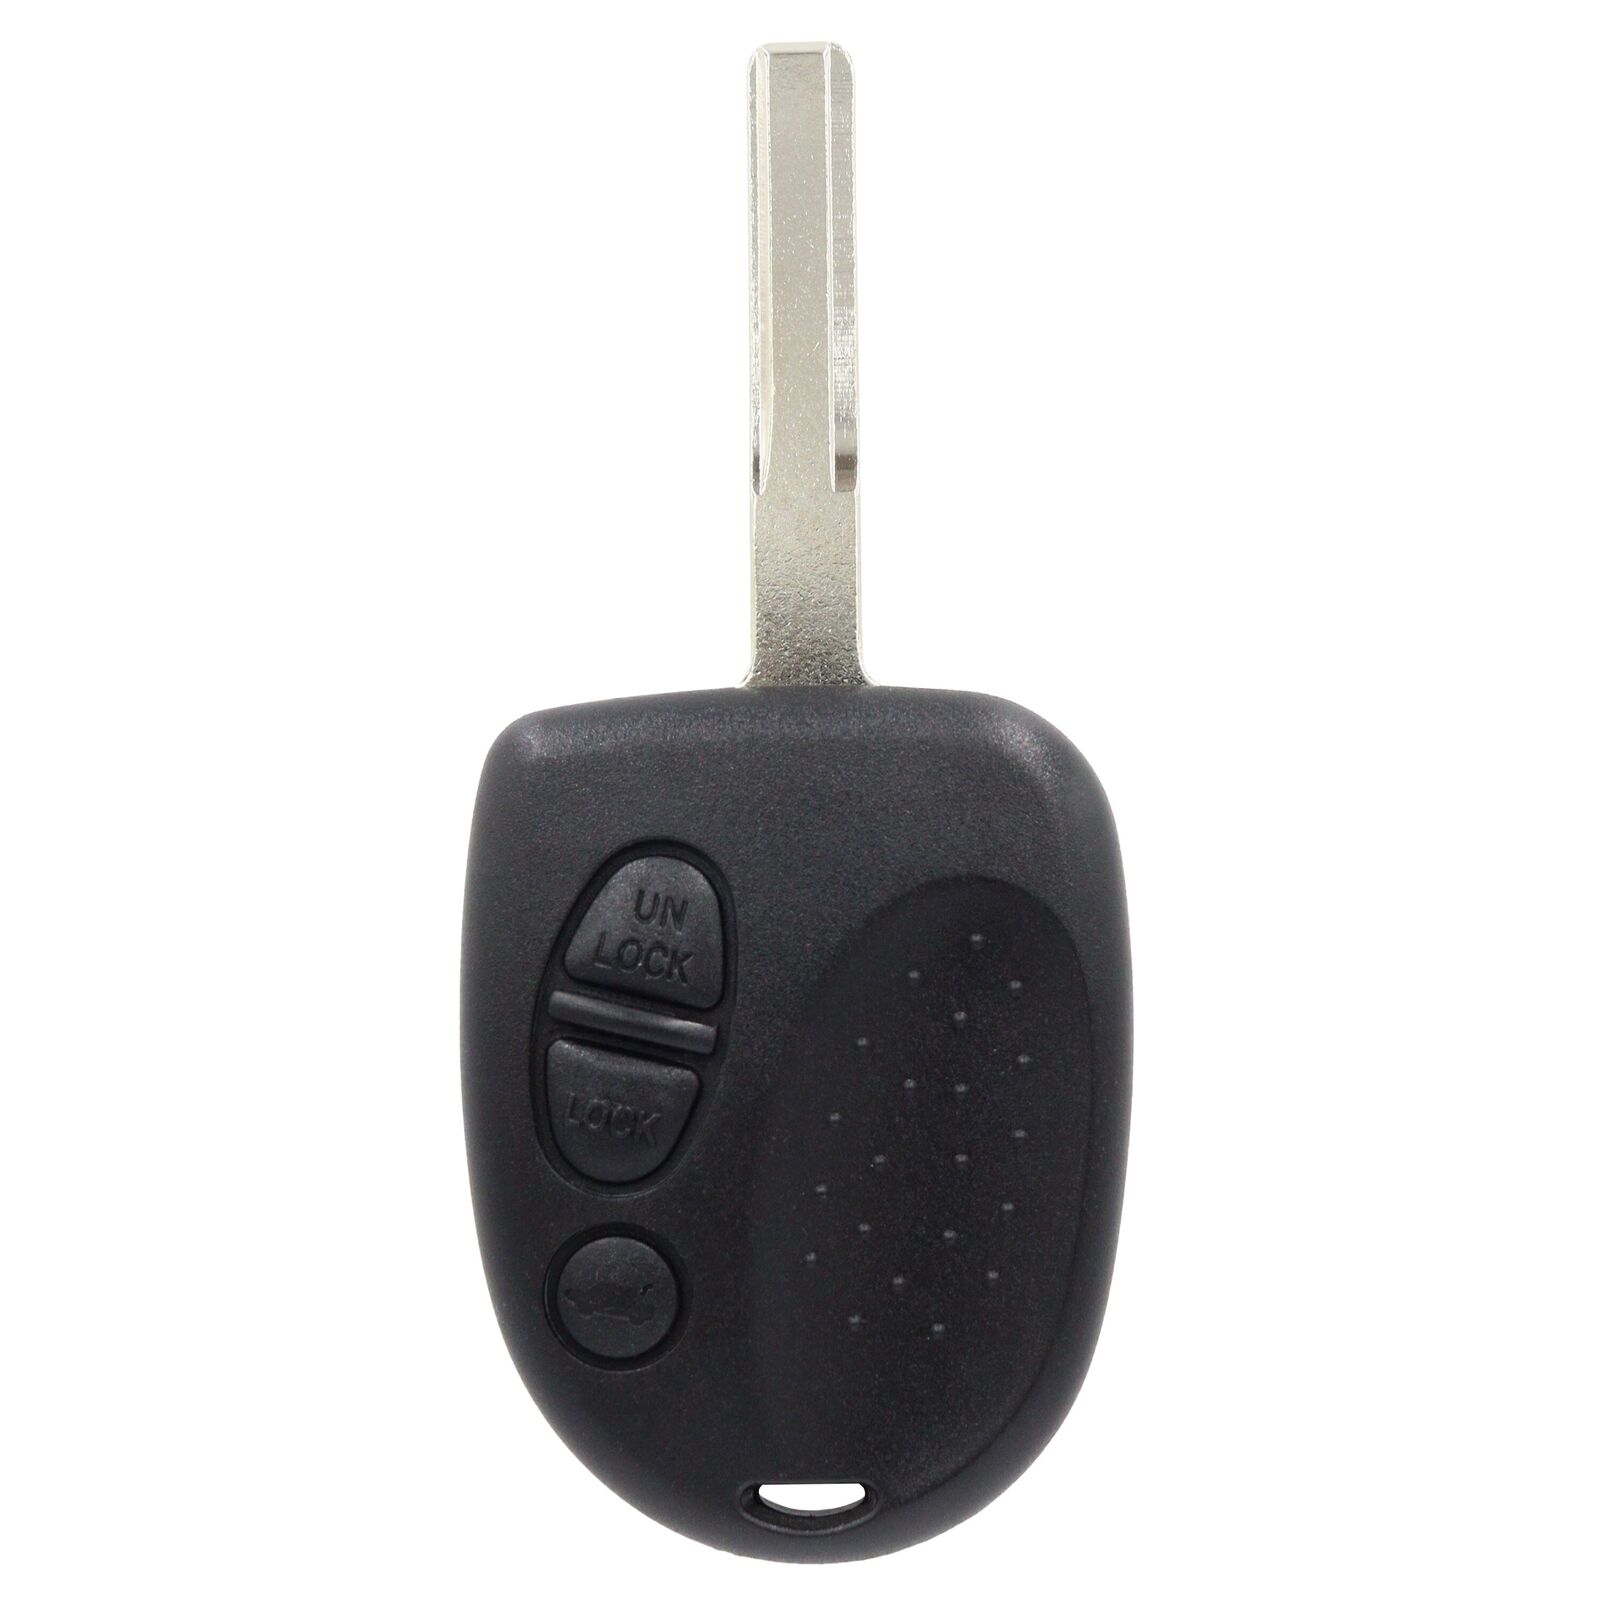 To Suit Holden Commodore 3 Button Car Remote Case/Shell Uncut Key VS VX VY VZ WH